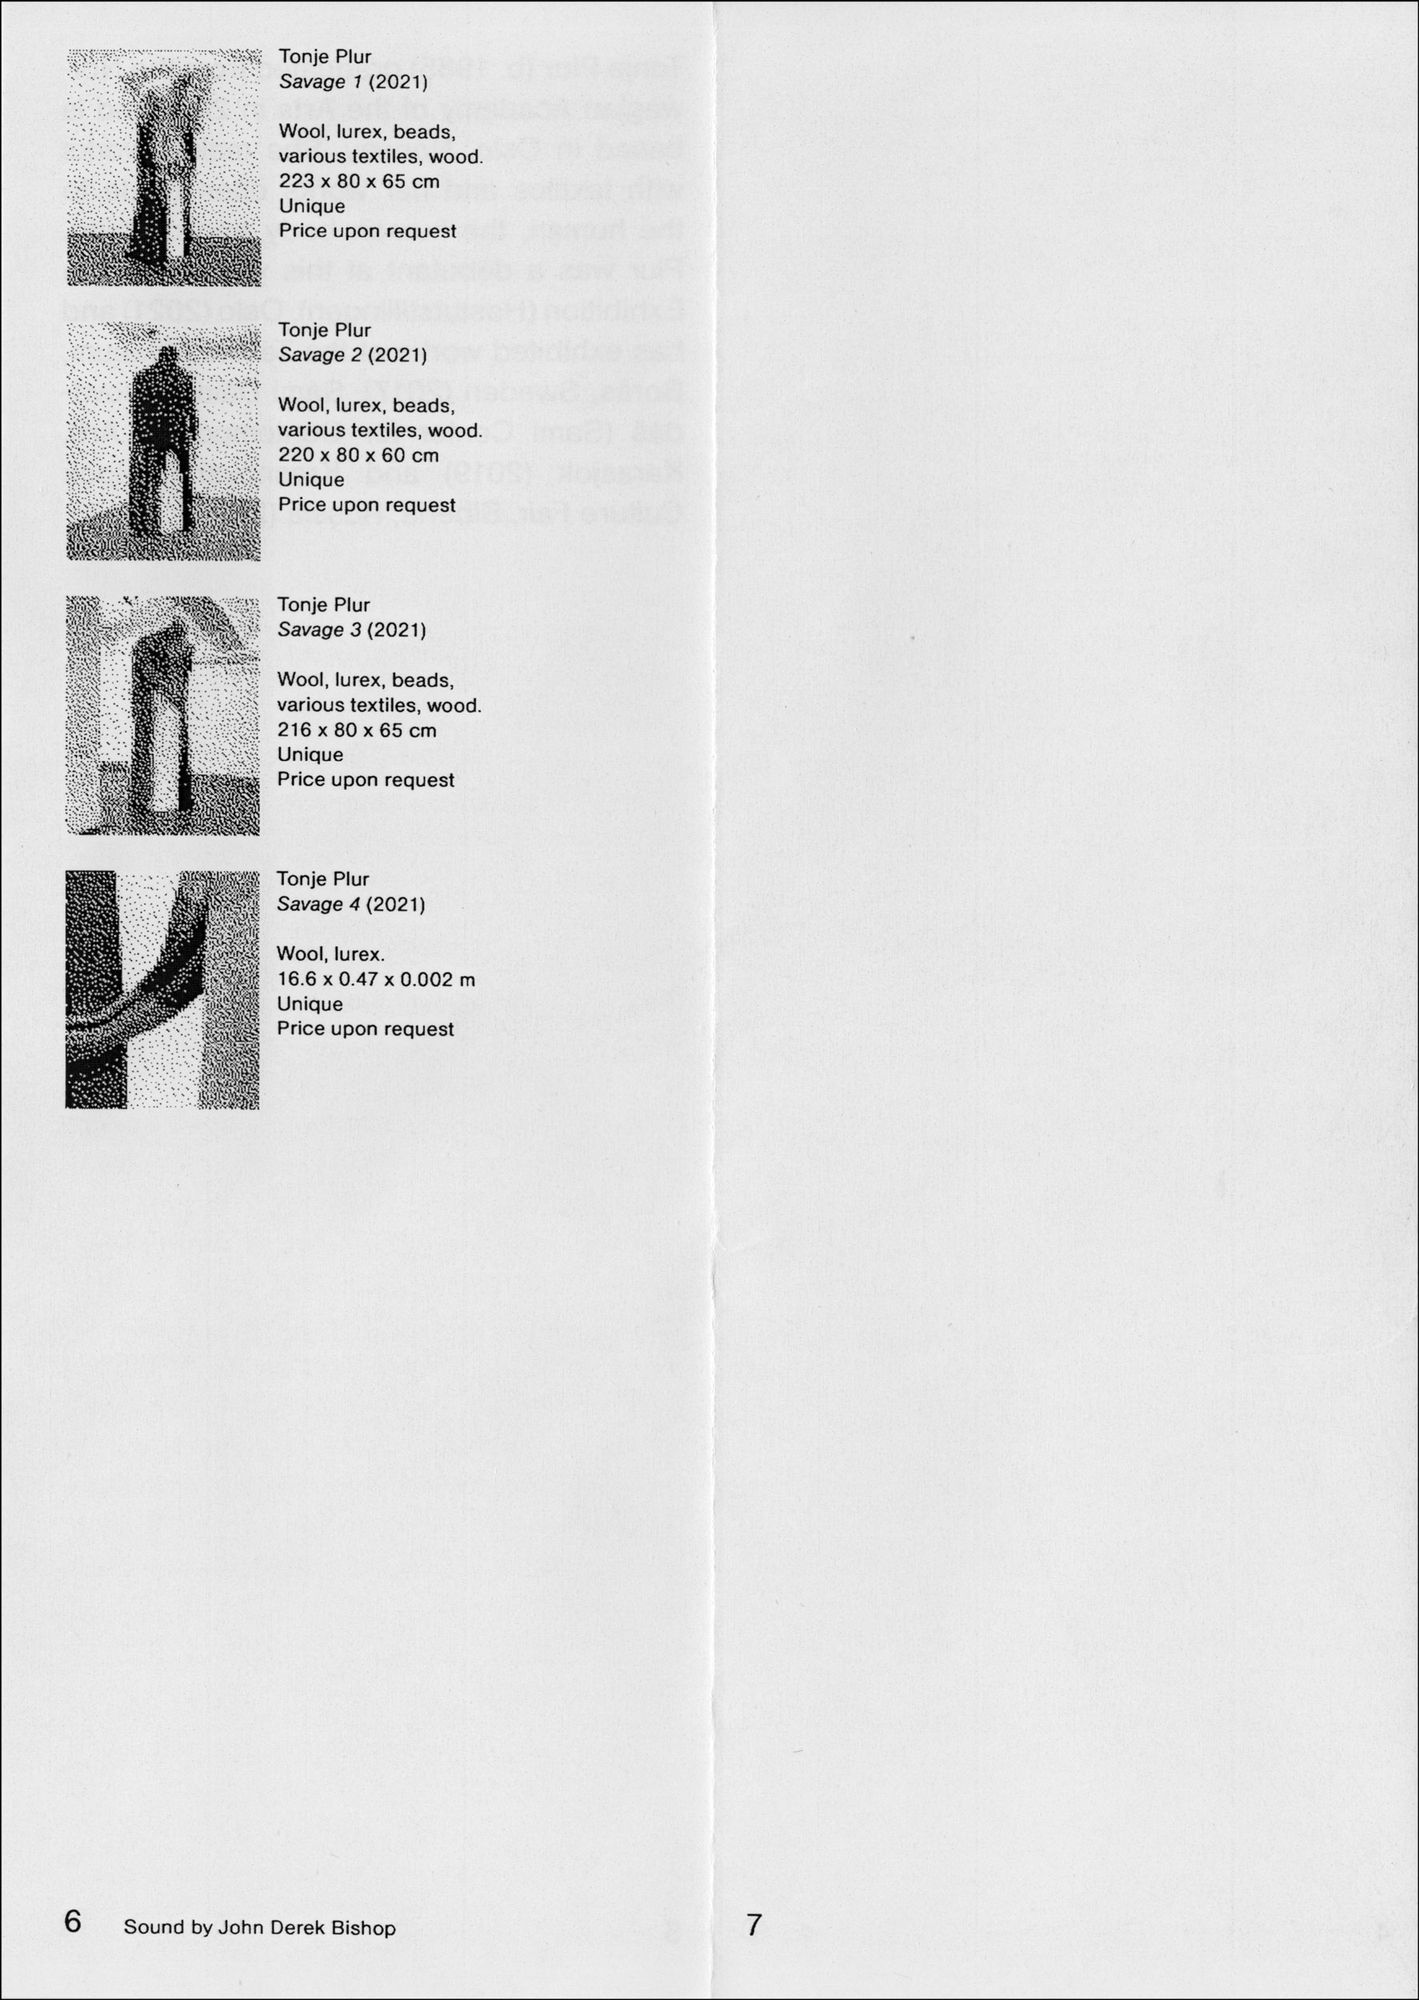 Catalog scan for Savage